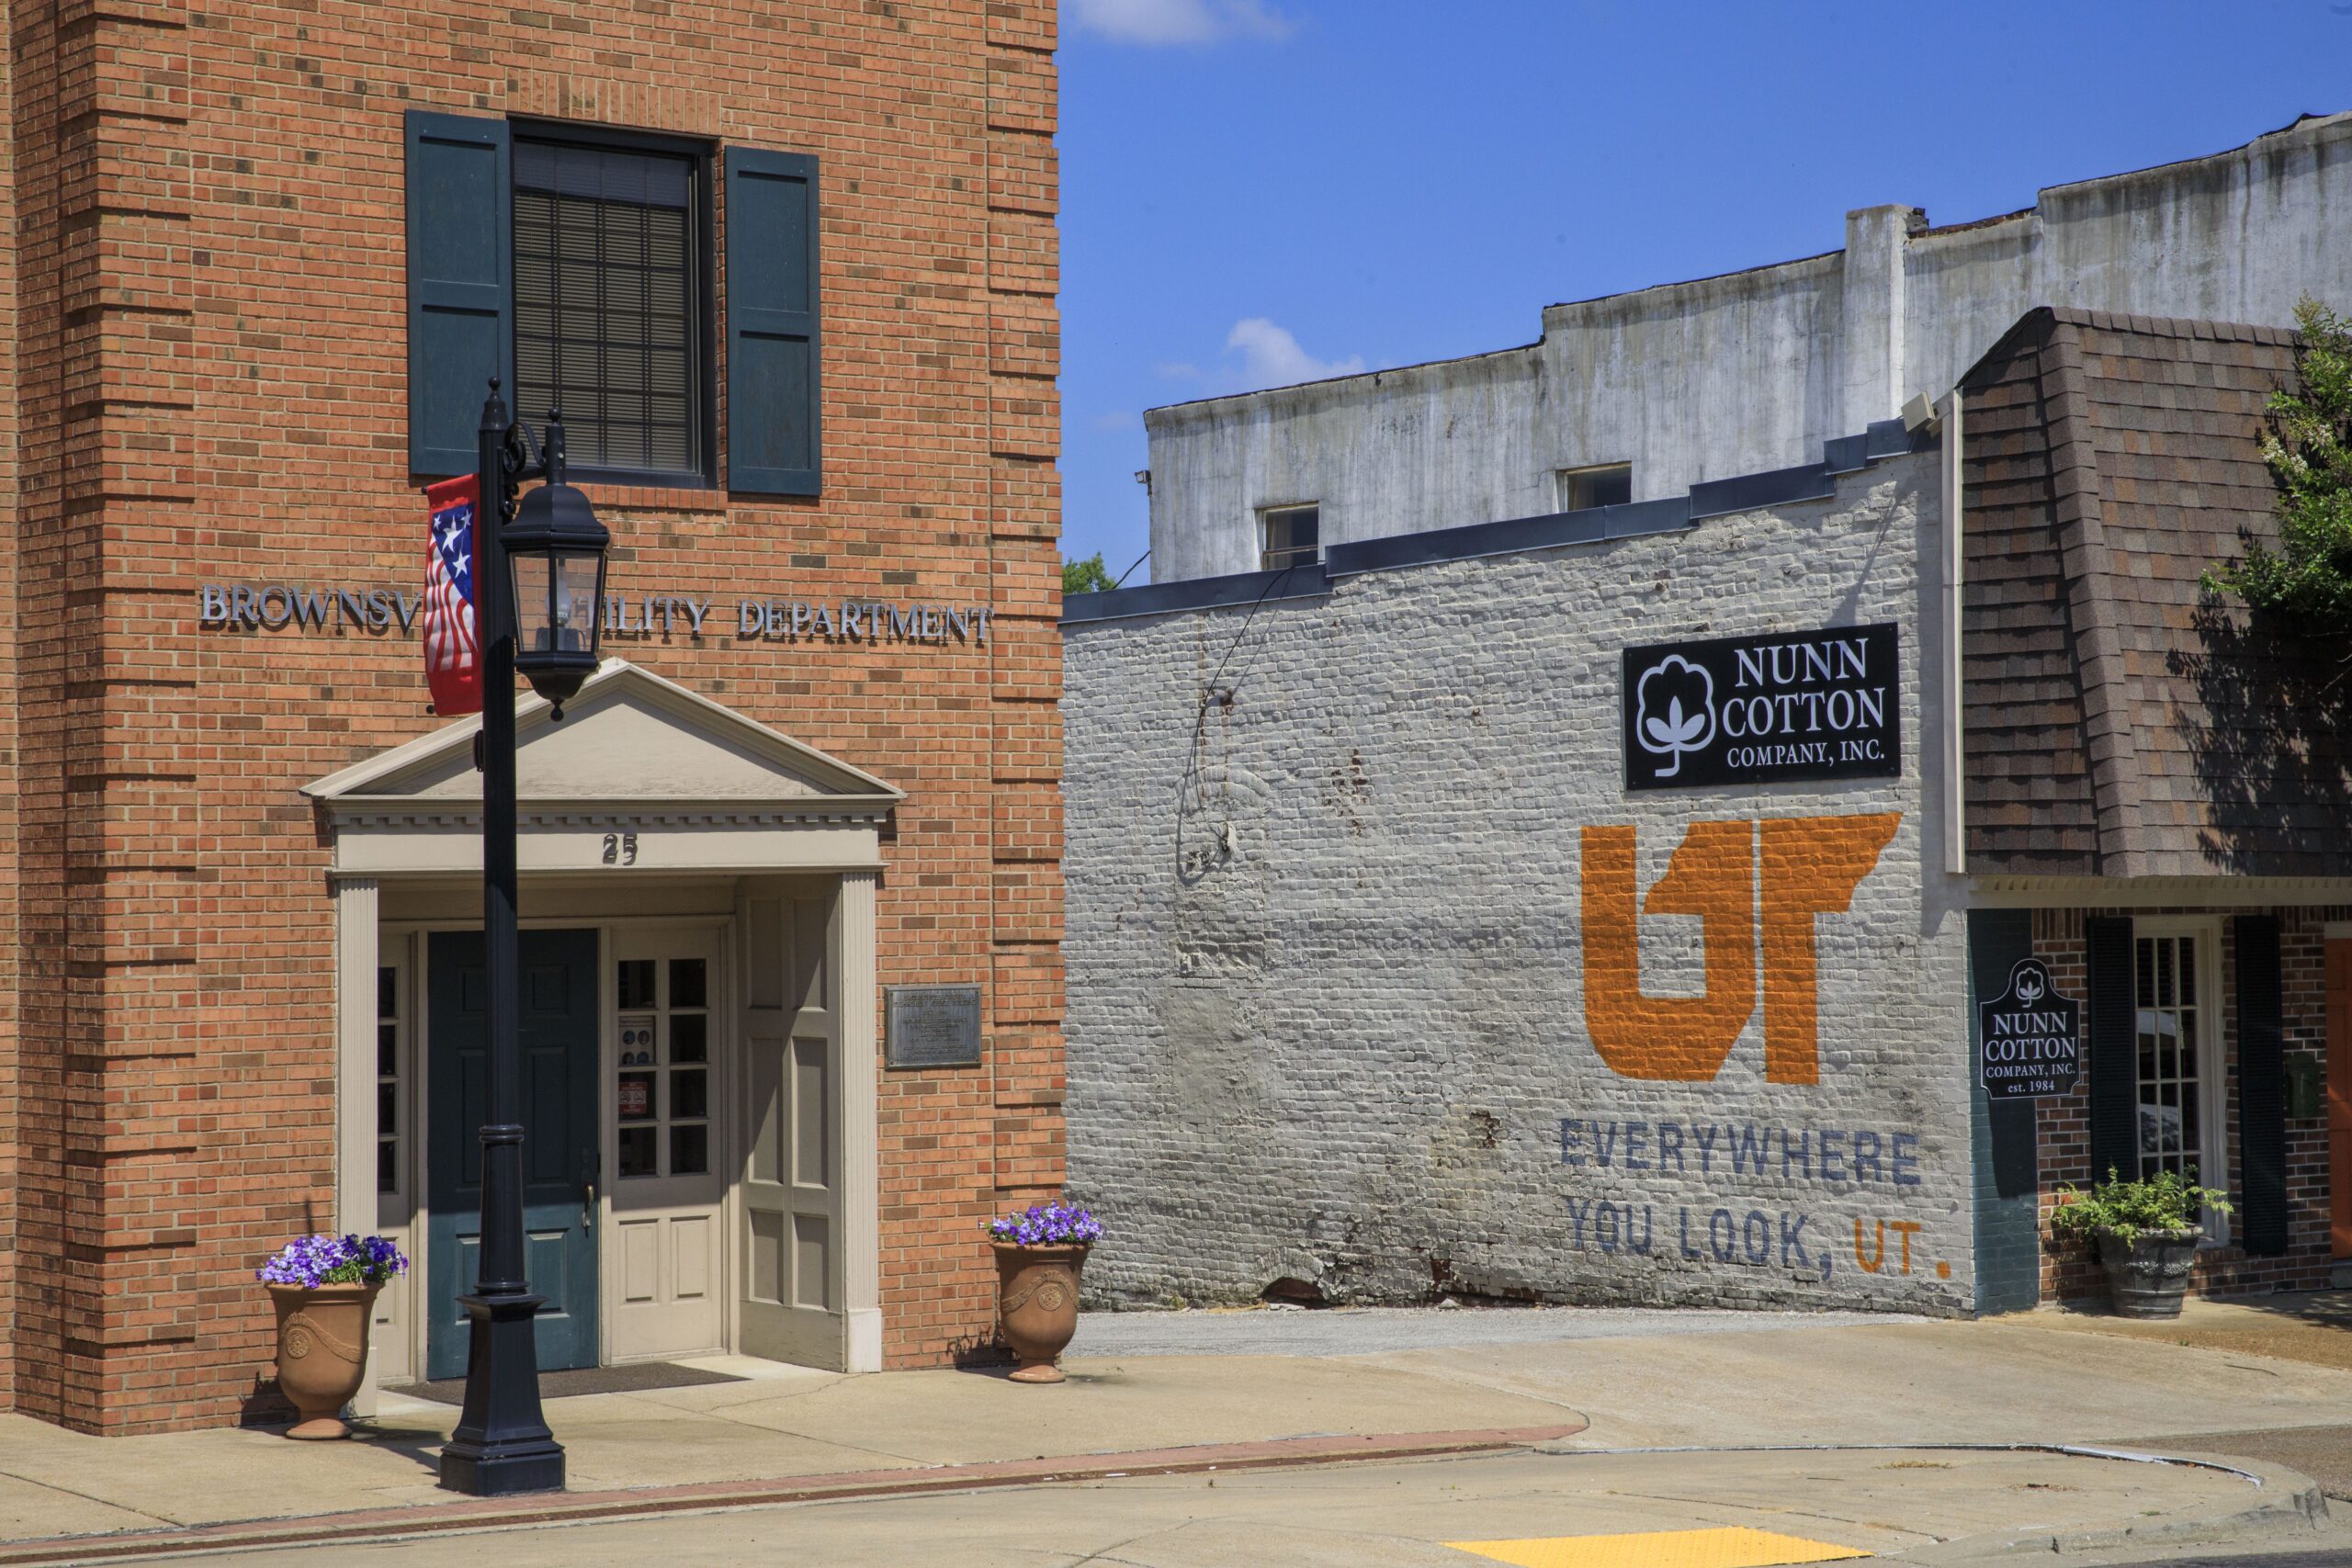 UT mural painted on the side of the Nunn Cotton Company building in Brownsville, Tennessee